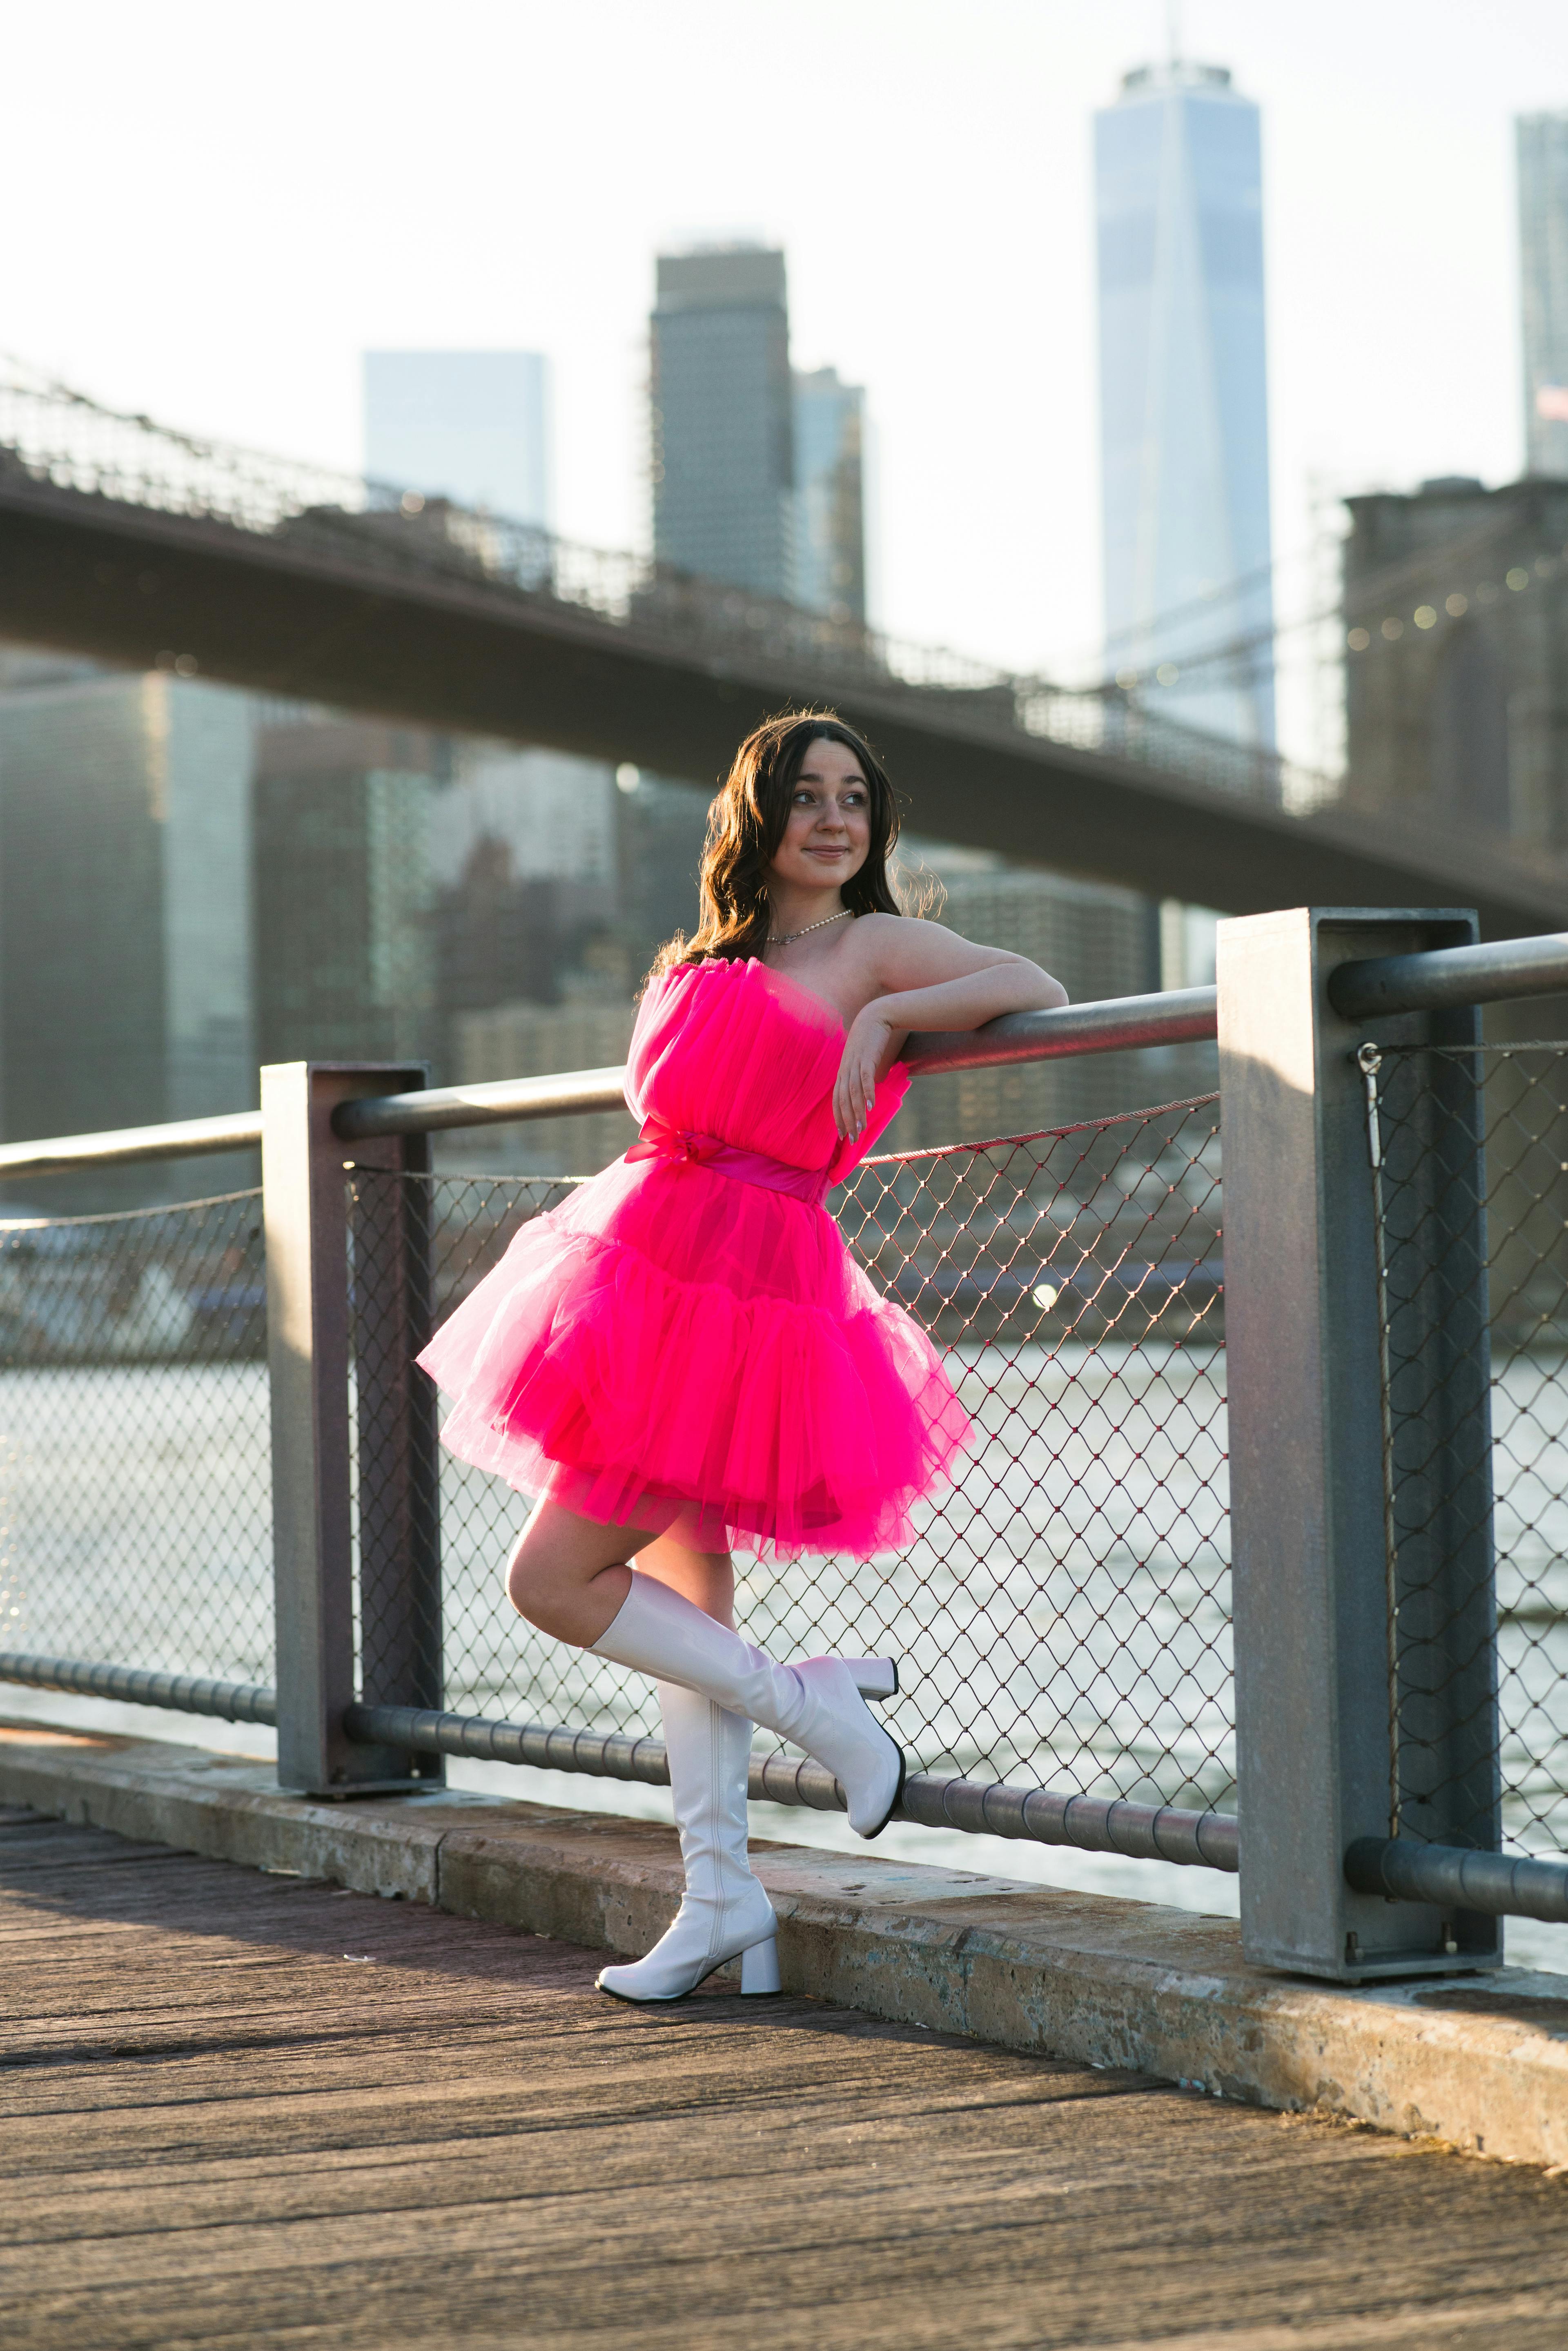 A ballerina in a vibrant pink tutu posing by a railing with the city skyline in the background